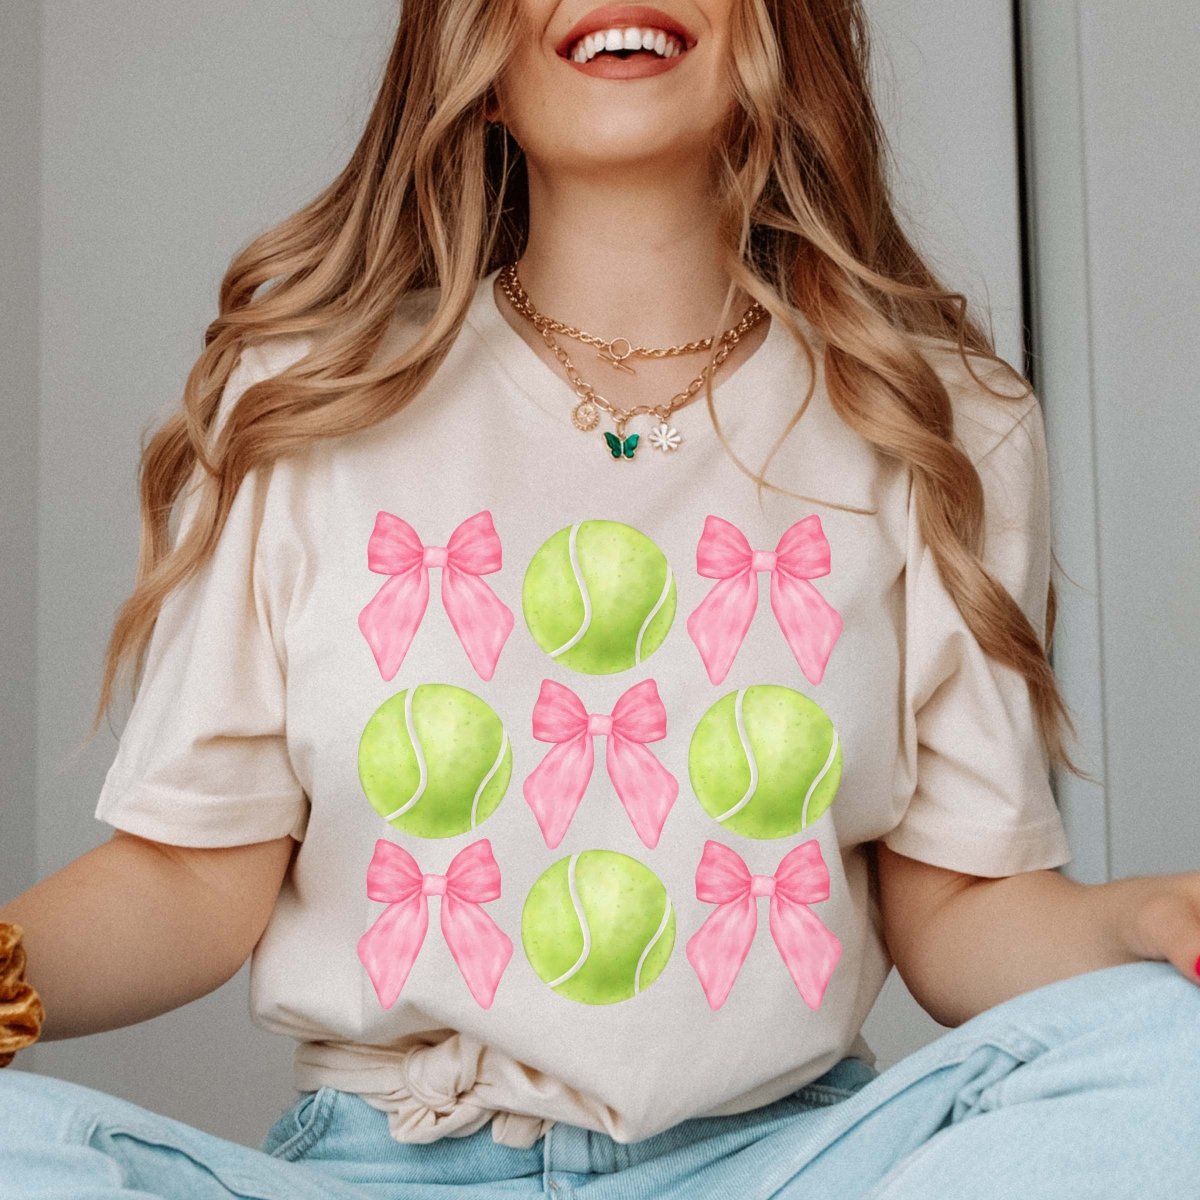 Tennis And Bows Collage Tee - Limeberry Designs